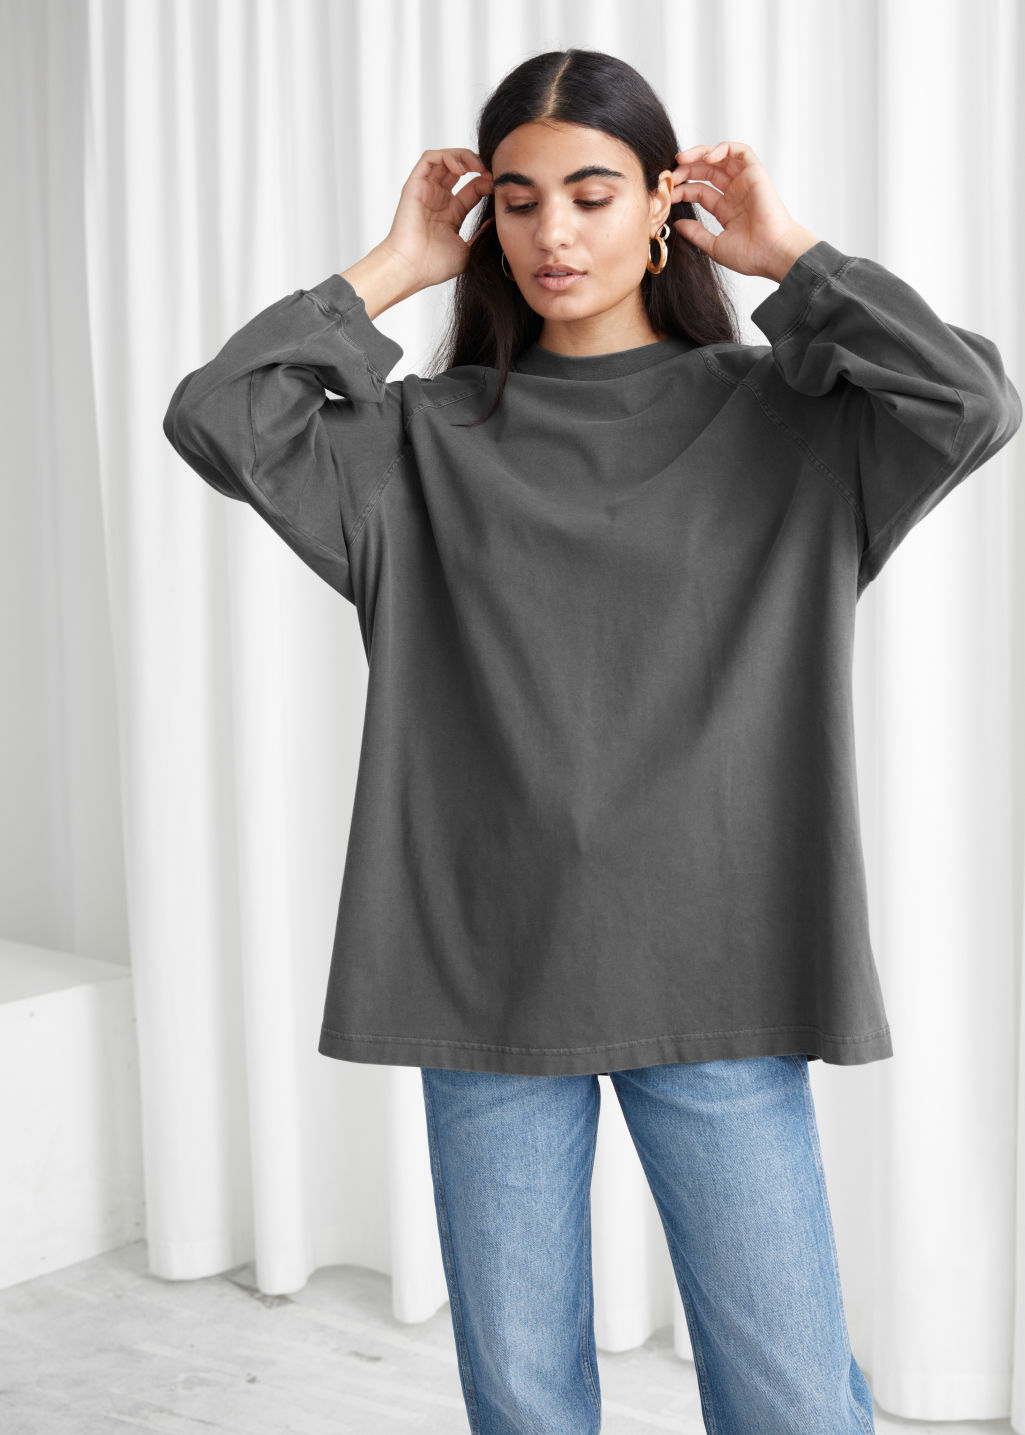 Voluminous Faded Wash Top - Grey - Tops - & Other Stories